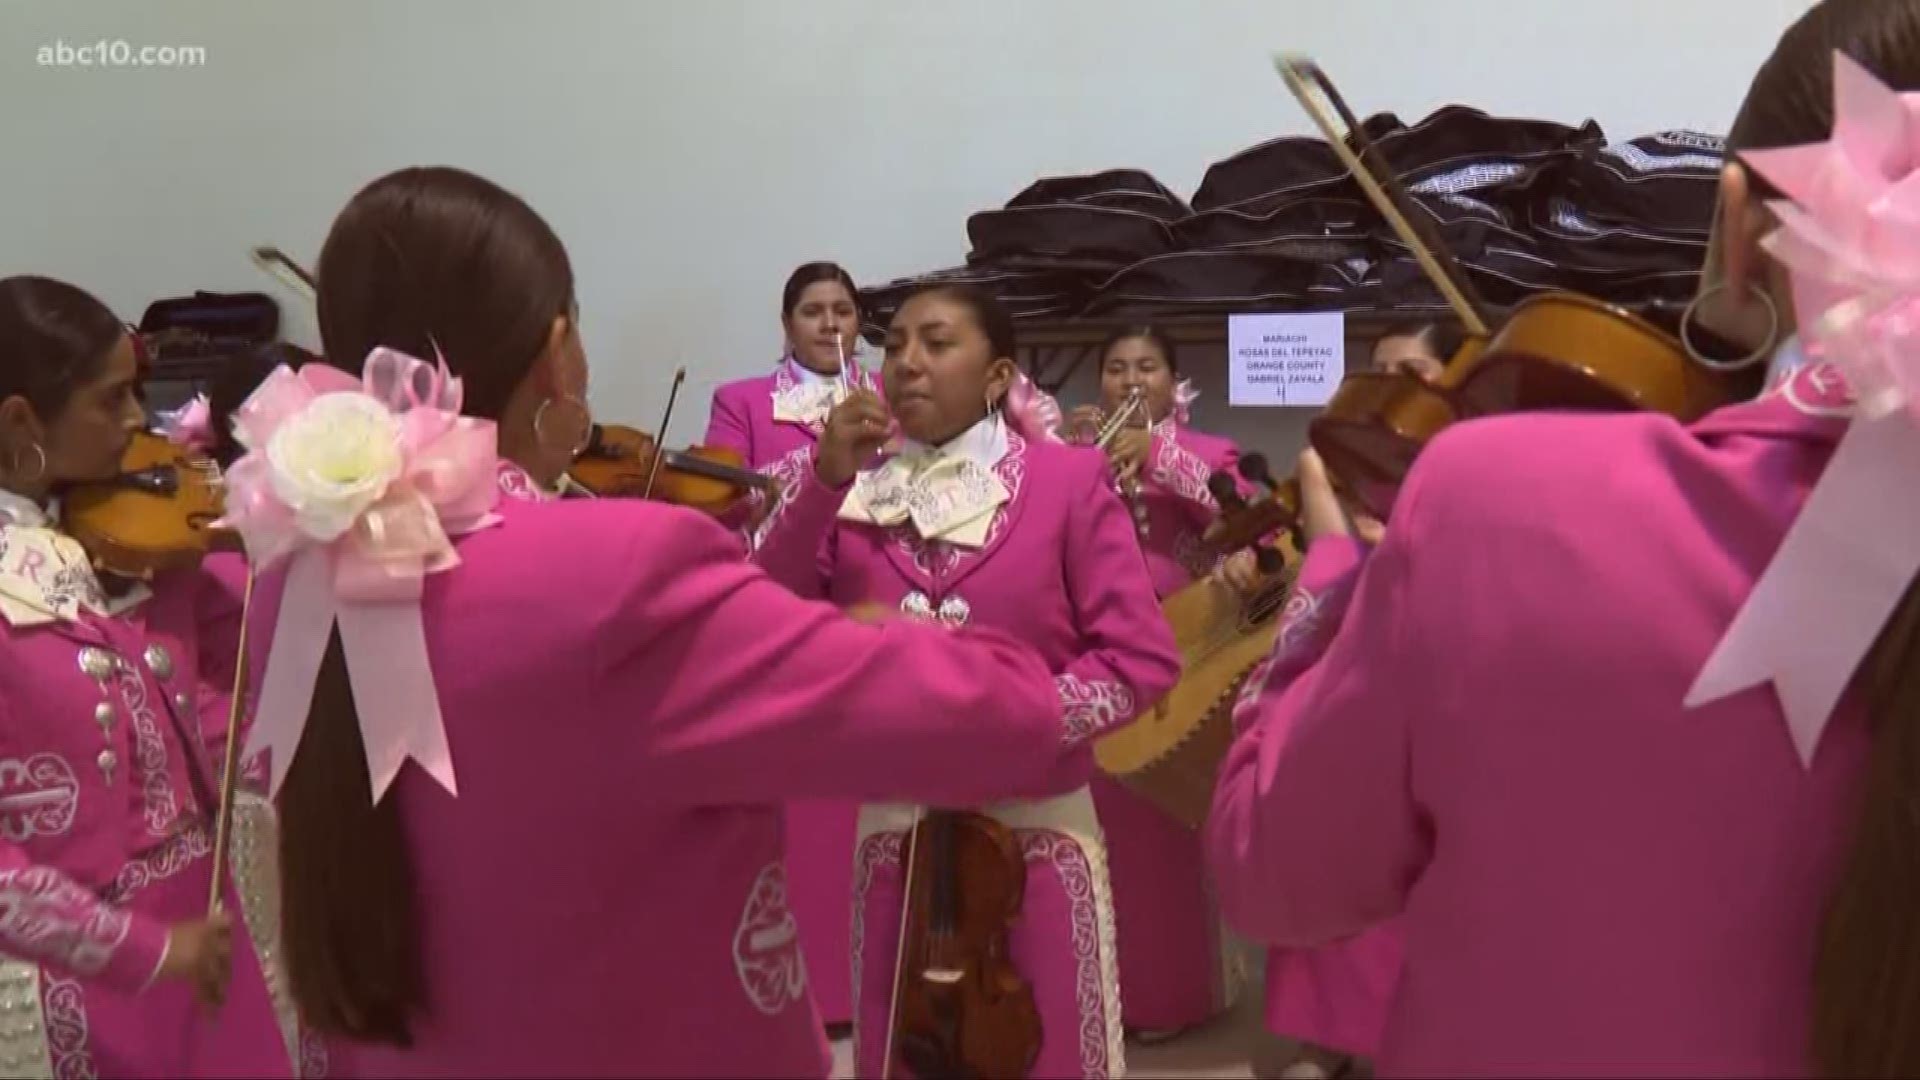 On Sunday, the California State Fair held an inaugural youth mariachi competition, inviting 10 teams from all across the state.